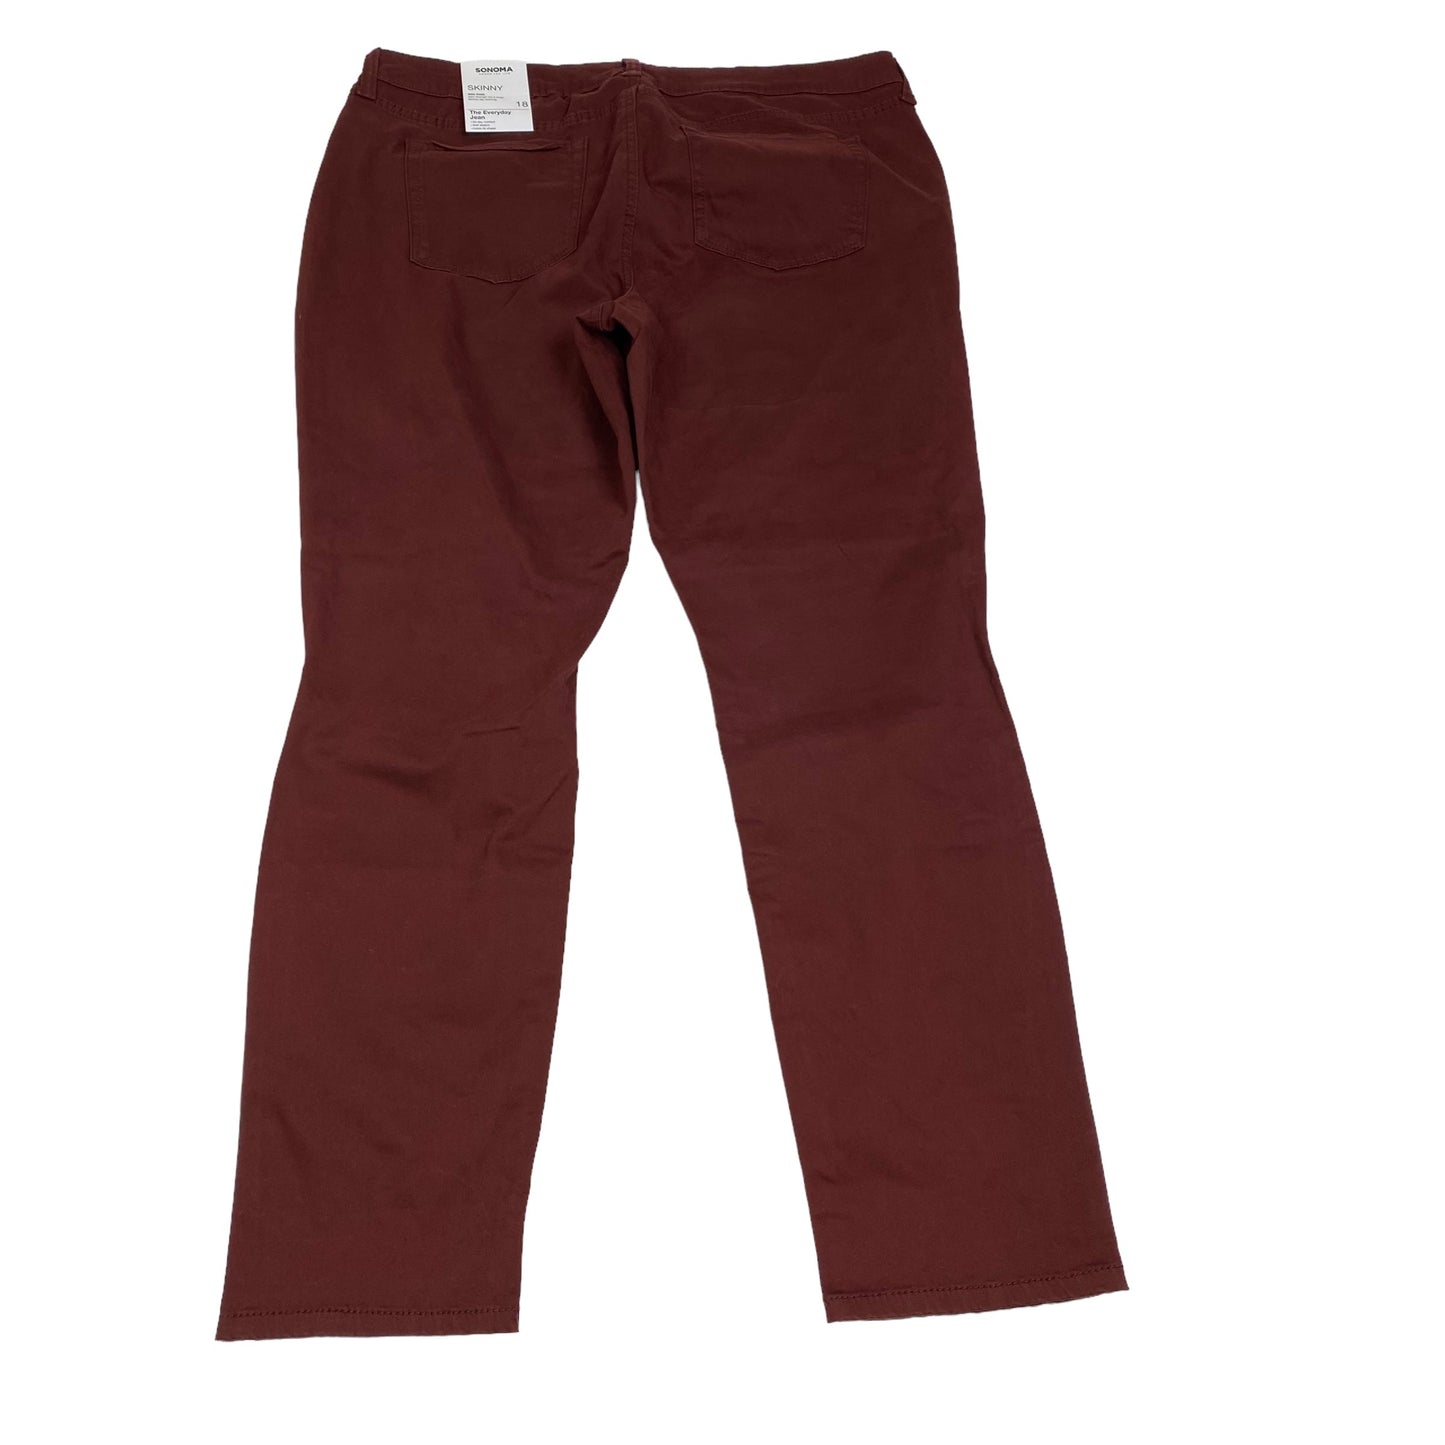 Pants Chinos & Khakis By Sonoma  Size: 18